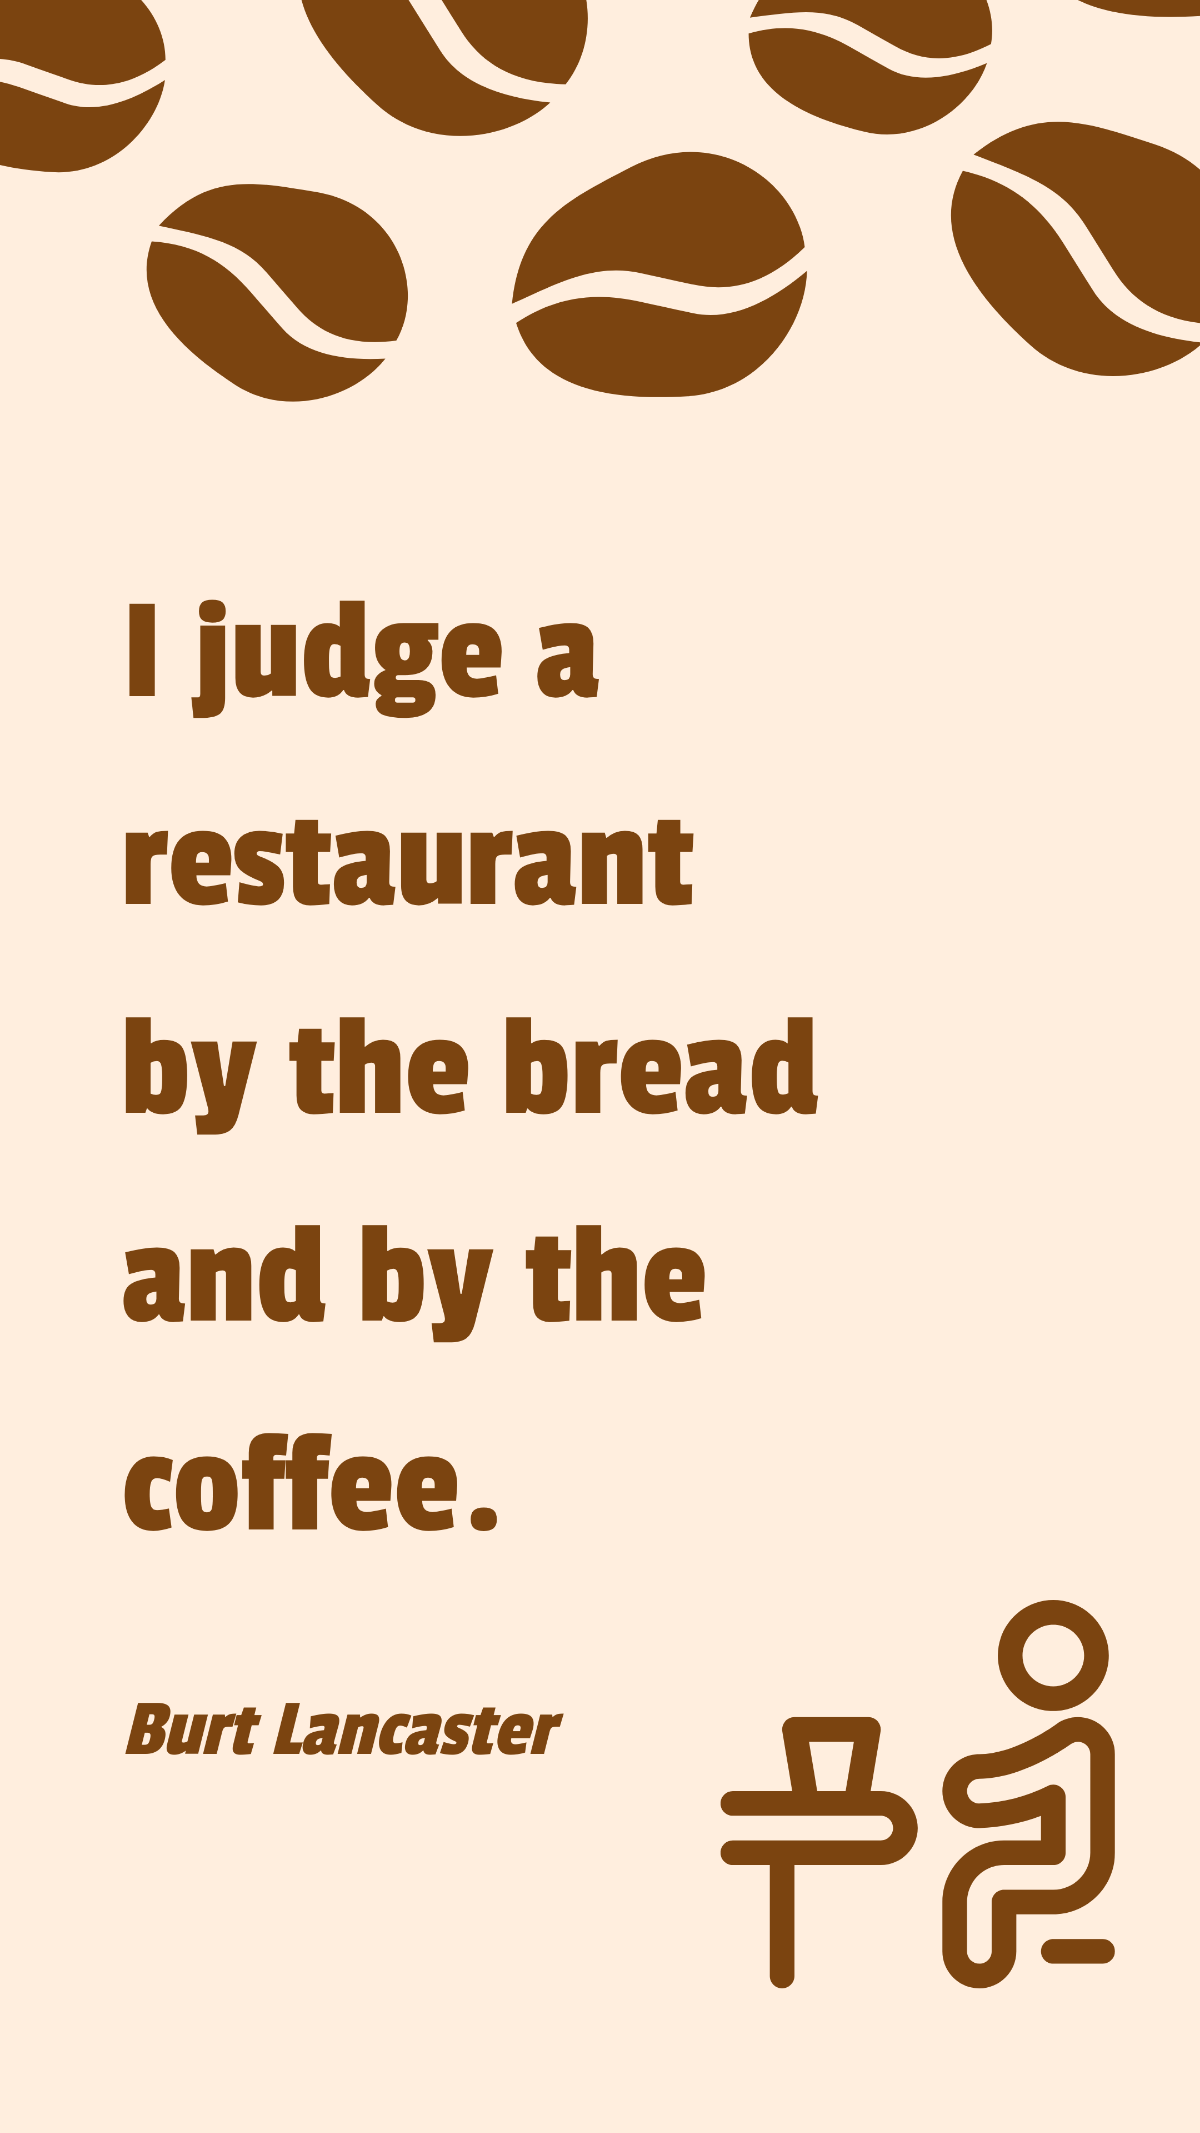 Free Burt Lancaster - I judge a restaurant by the bread and by the coffee. Template